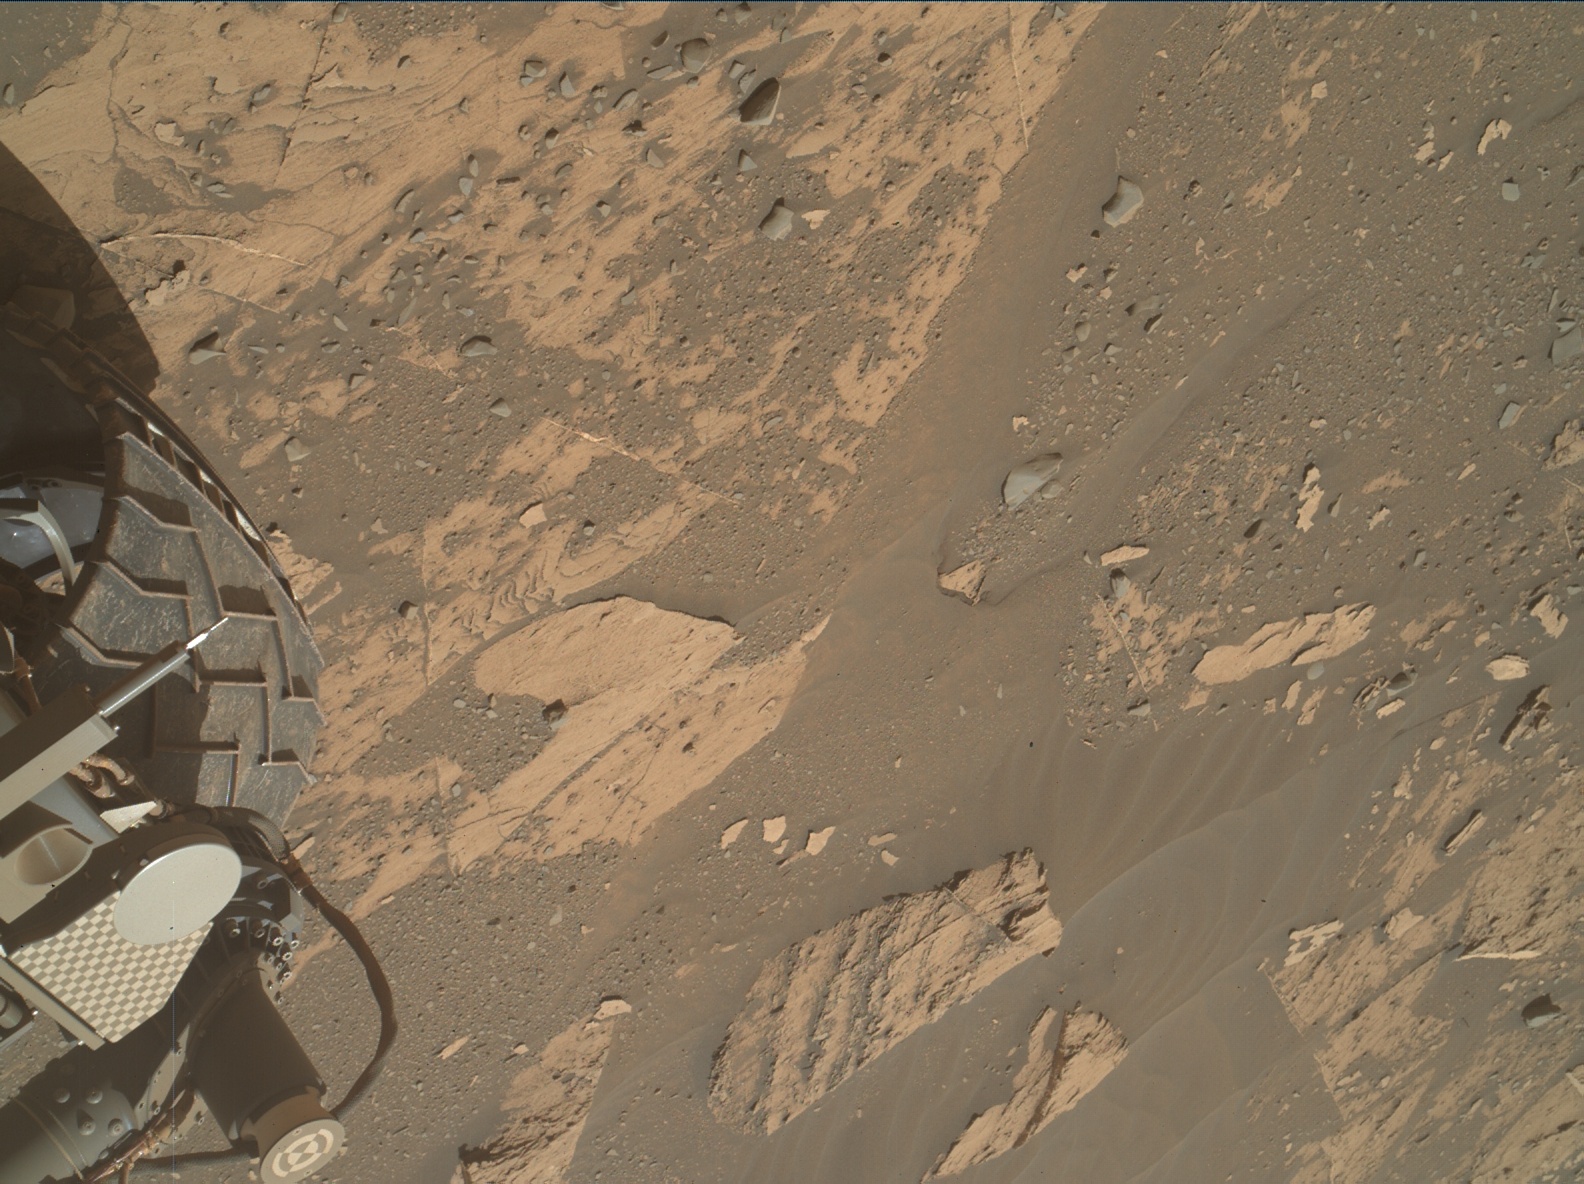 Nasa's Mars rover Curiosity acquired this image using its Mars Hand Lens Imager (MAHLI) on Sol 3303